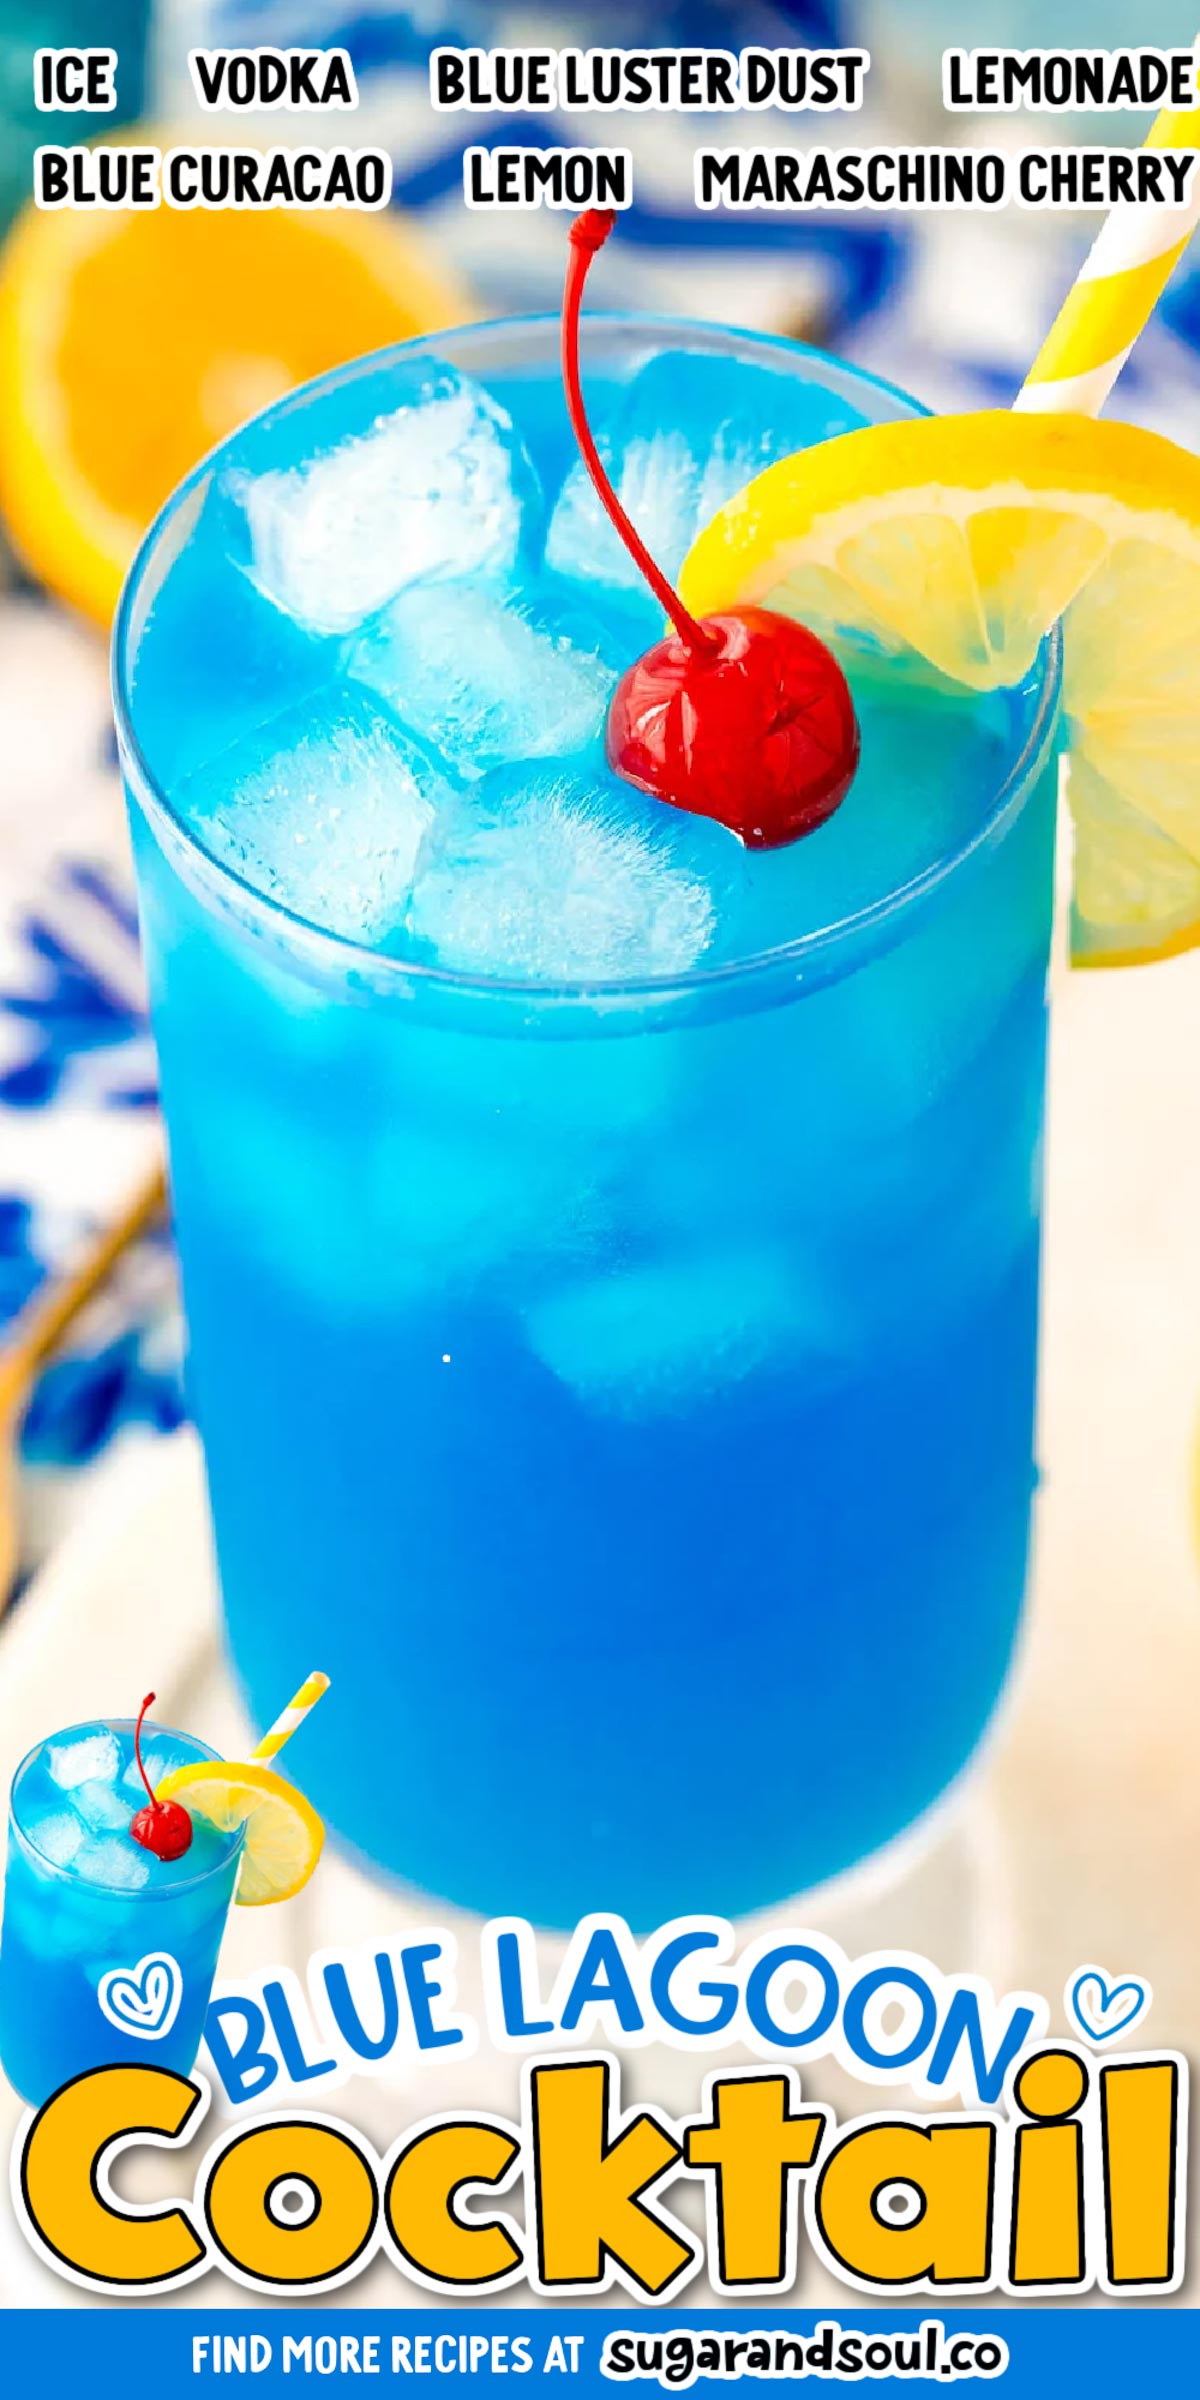 Blue Lagoon Cocktail is a sweet, bright blue drink that's made with 3 ingredients before being dressed up with garnishes and luster dust! A fun and simple drink that's great for sipping poolside! via @sugarandsoulco